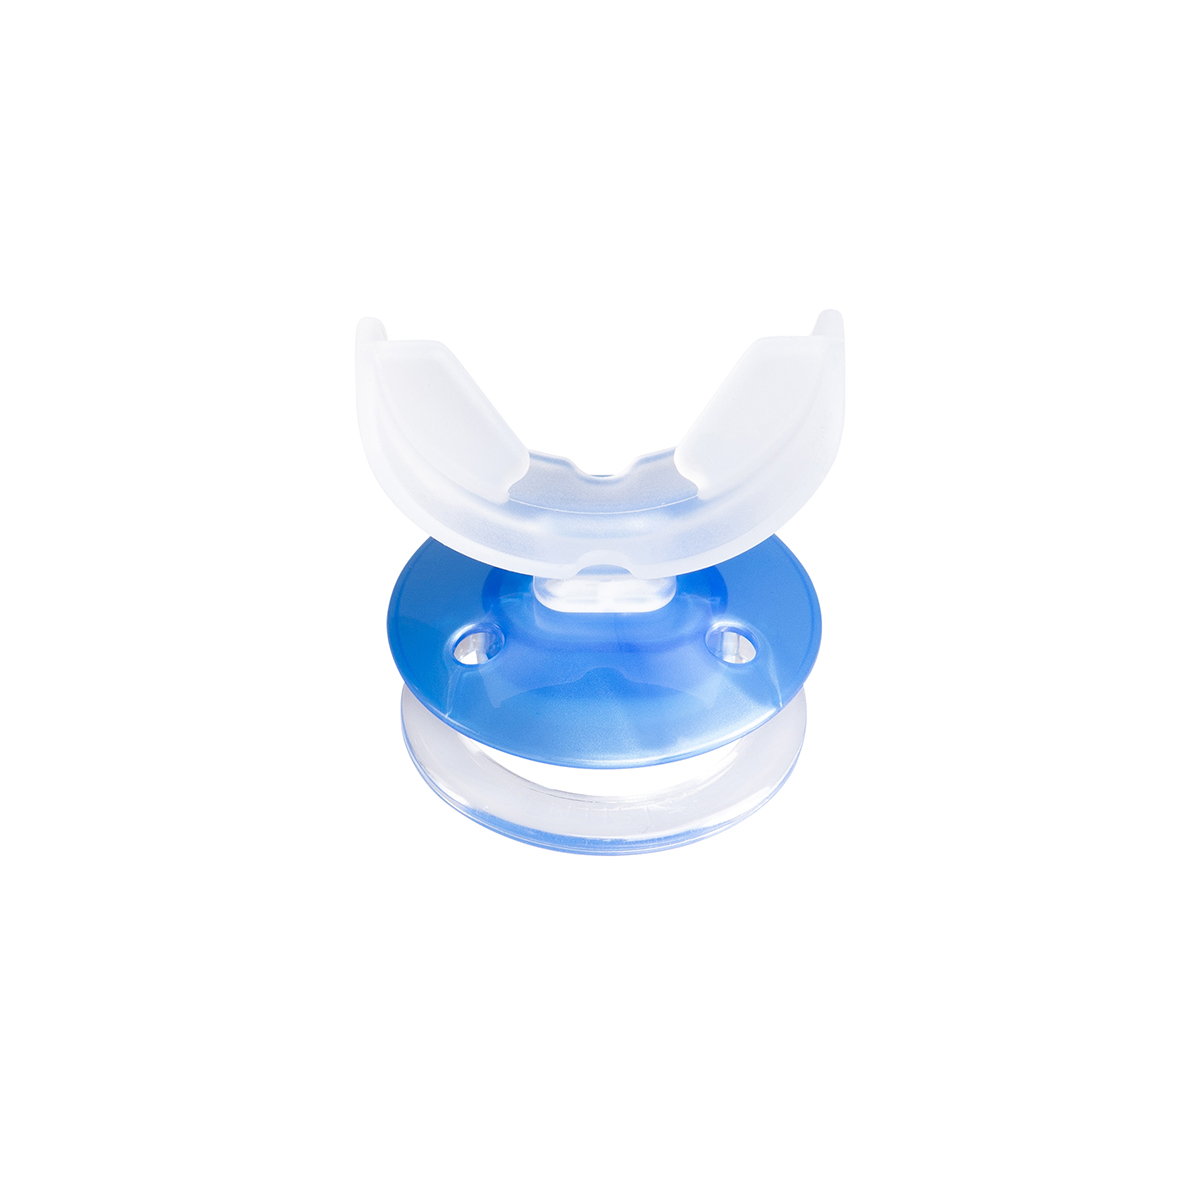 STOPPi® Weaning Soother Blue